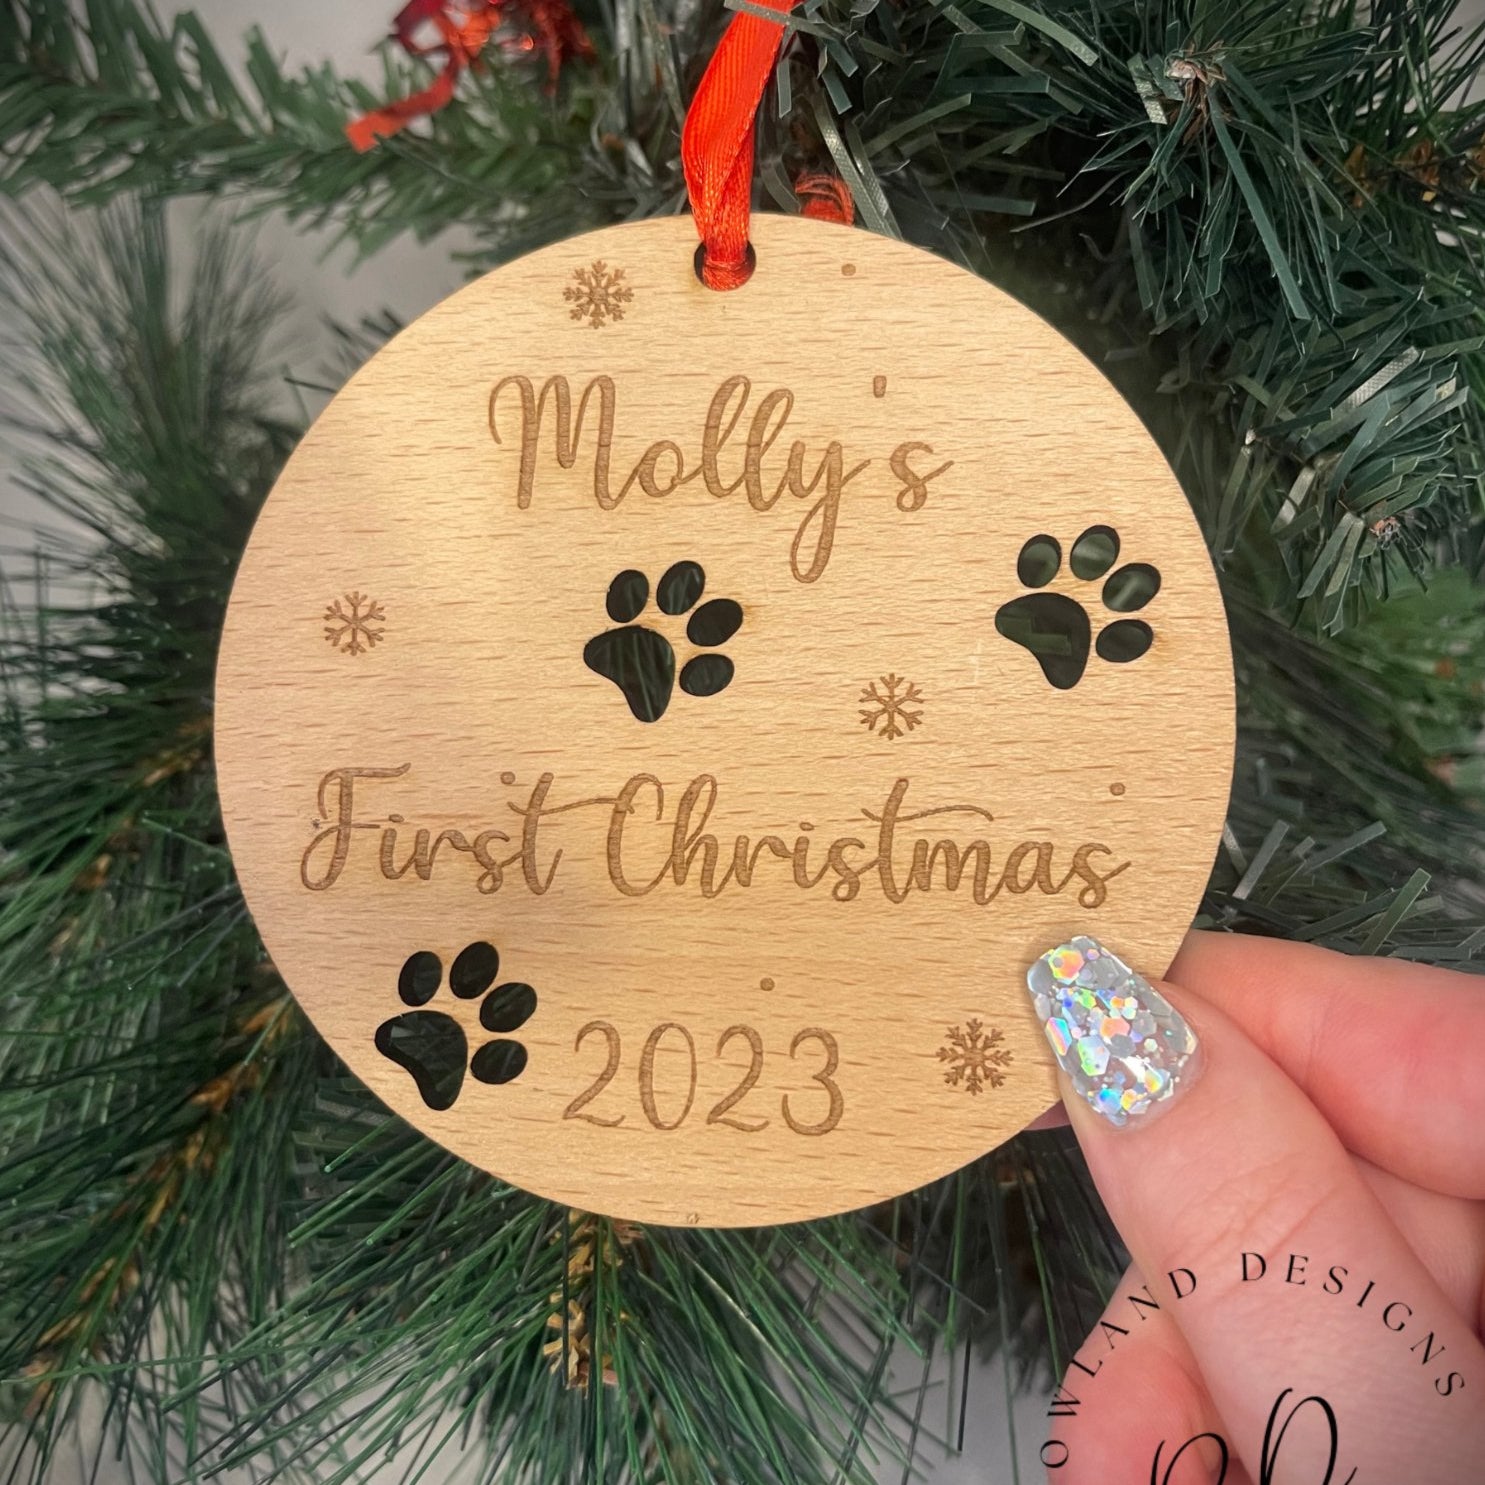 Cherished Keepsake Bauble - Pup's First Christmas with Engraved Details